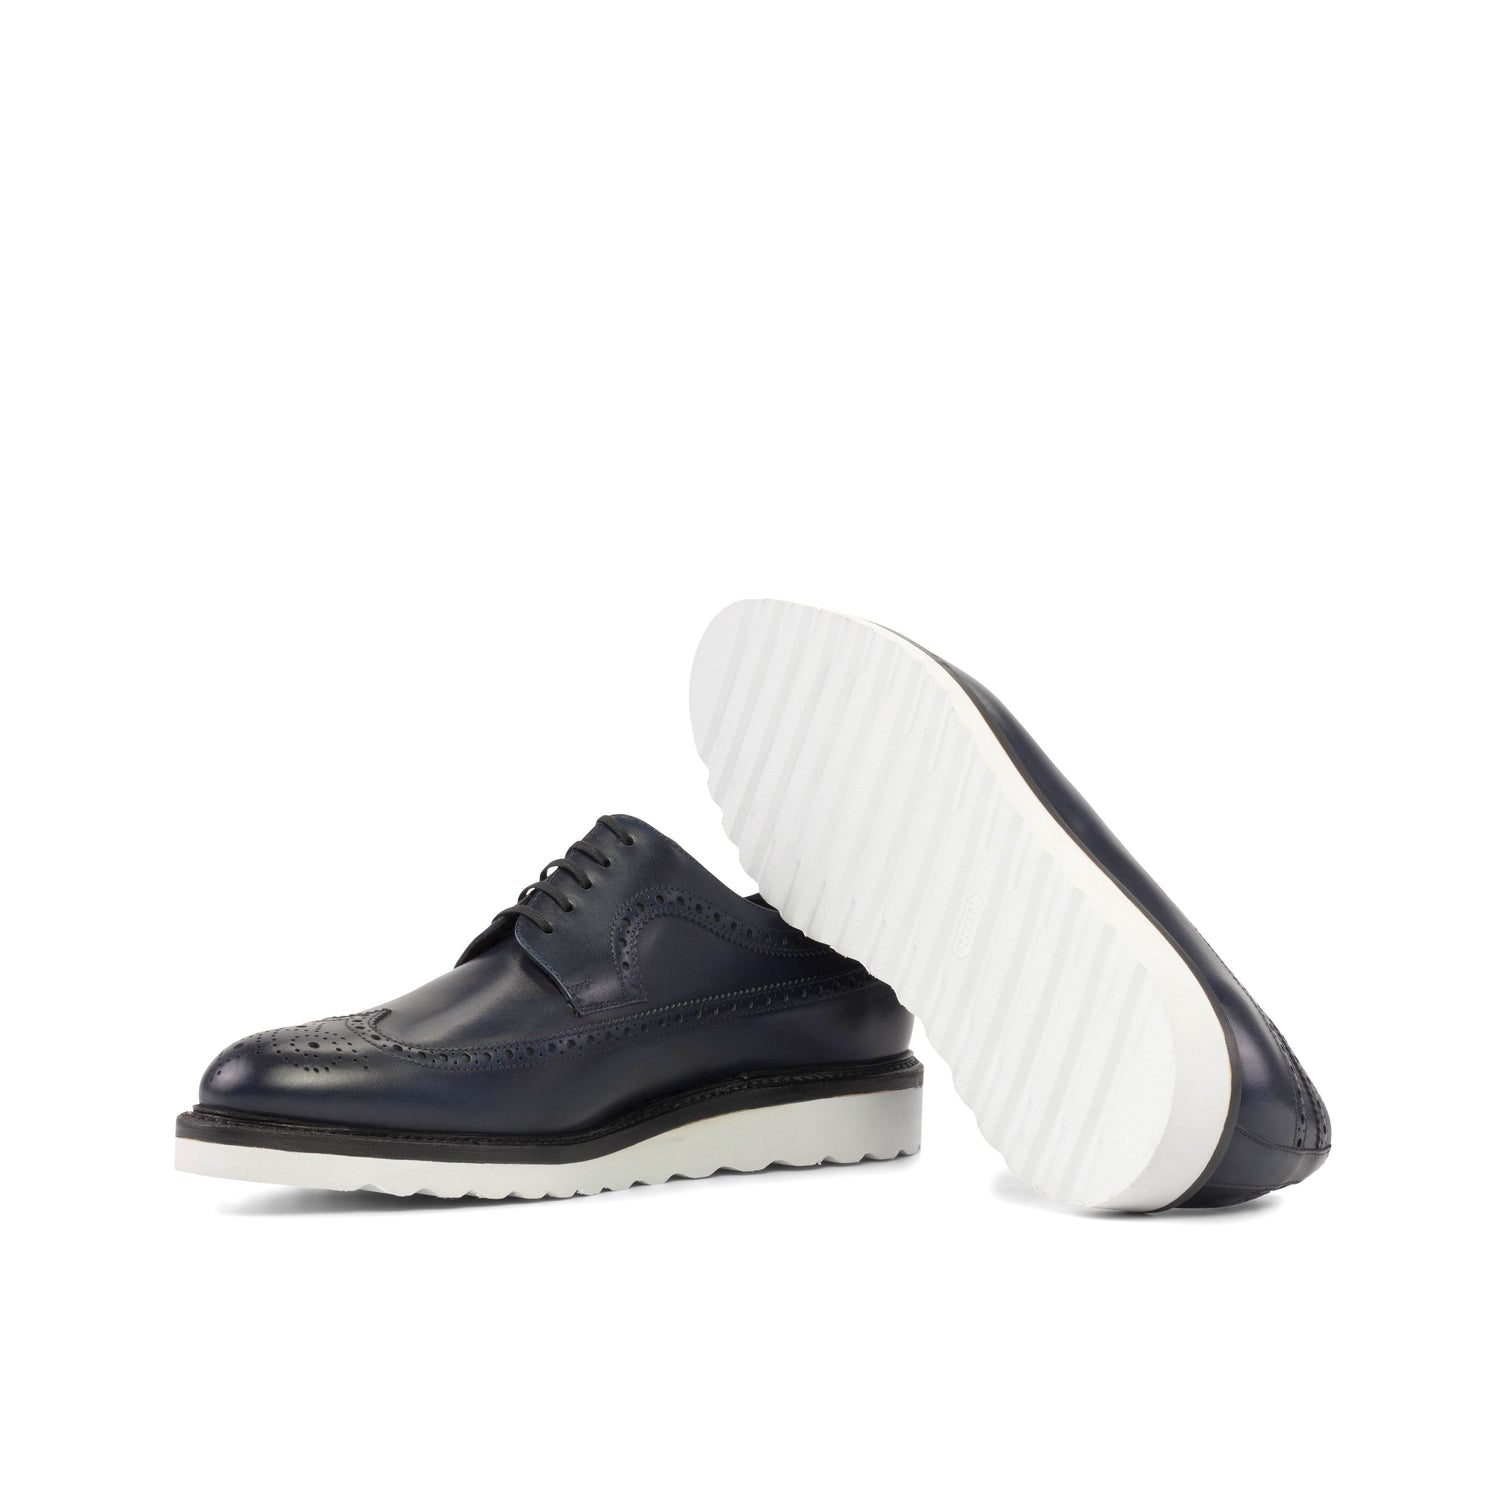 Vechter iets Omhoog gaan SUITCAFE FastLane Longwing Blucher Navy Leather White Wedge Sole Men's